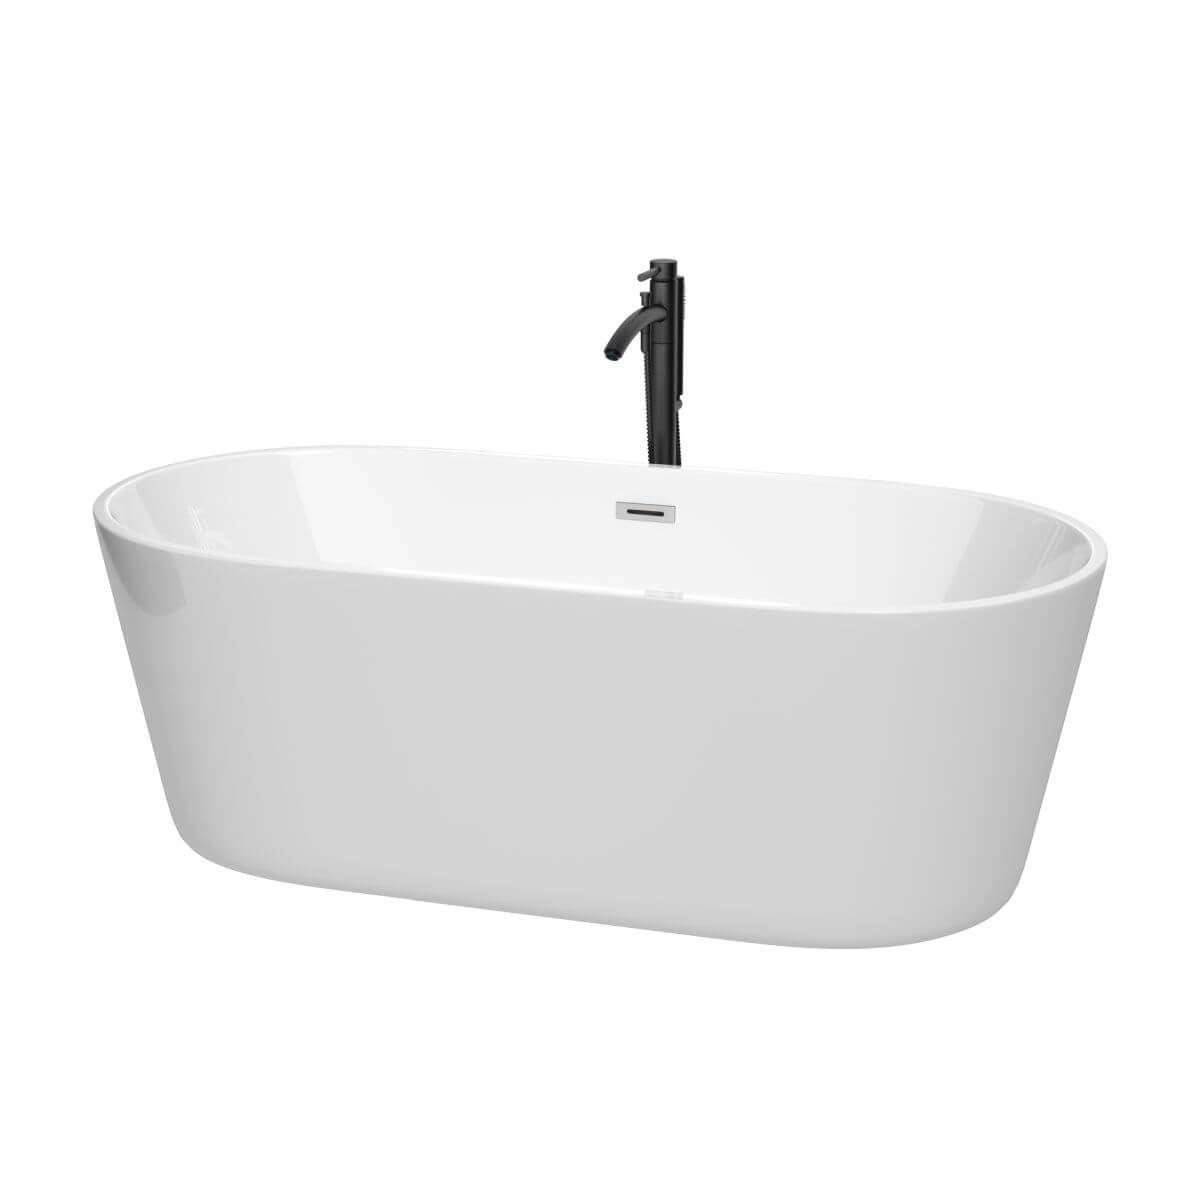 Wyndham Collection Carissa 67 inch Freestanding Bathtub in White with Polished Chrome Trim and Floor Mounted Faucet in Matte Black - WCOBT101267PCATPBK